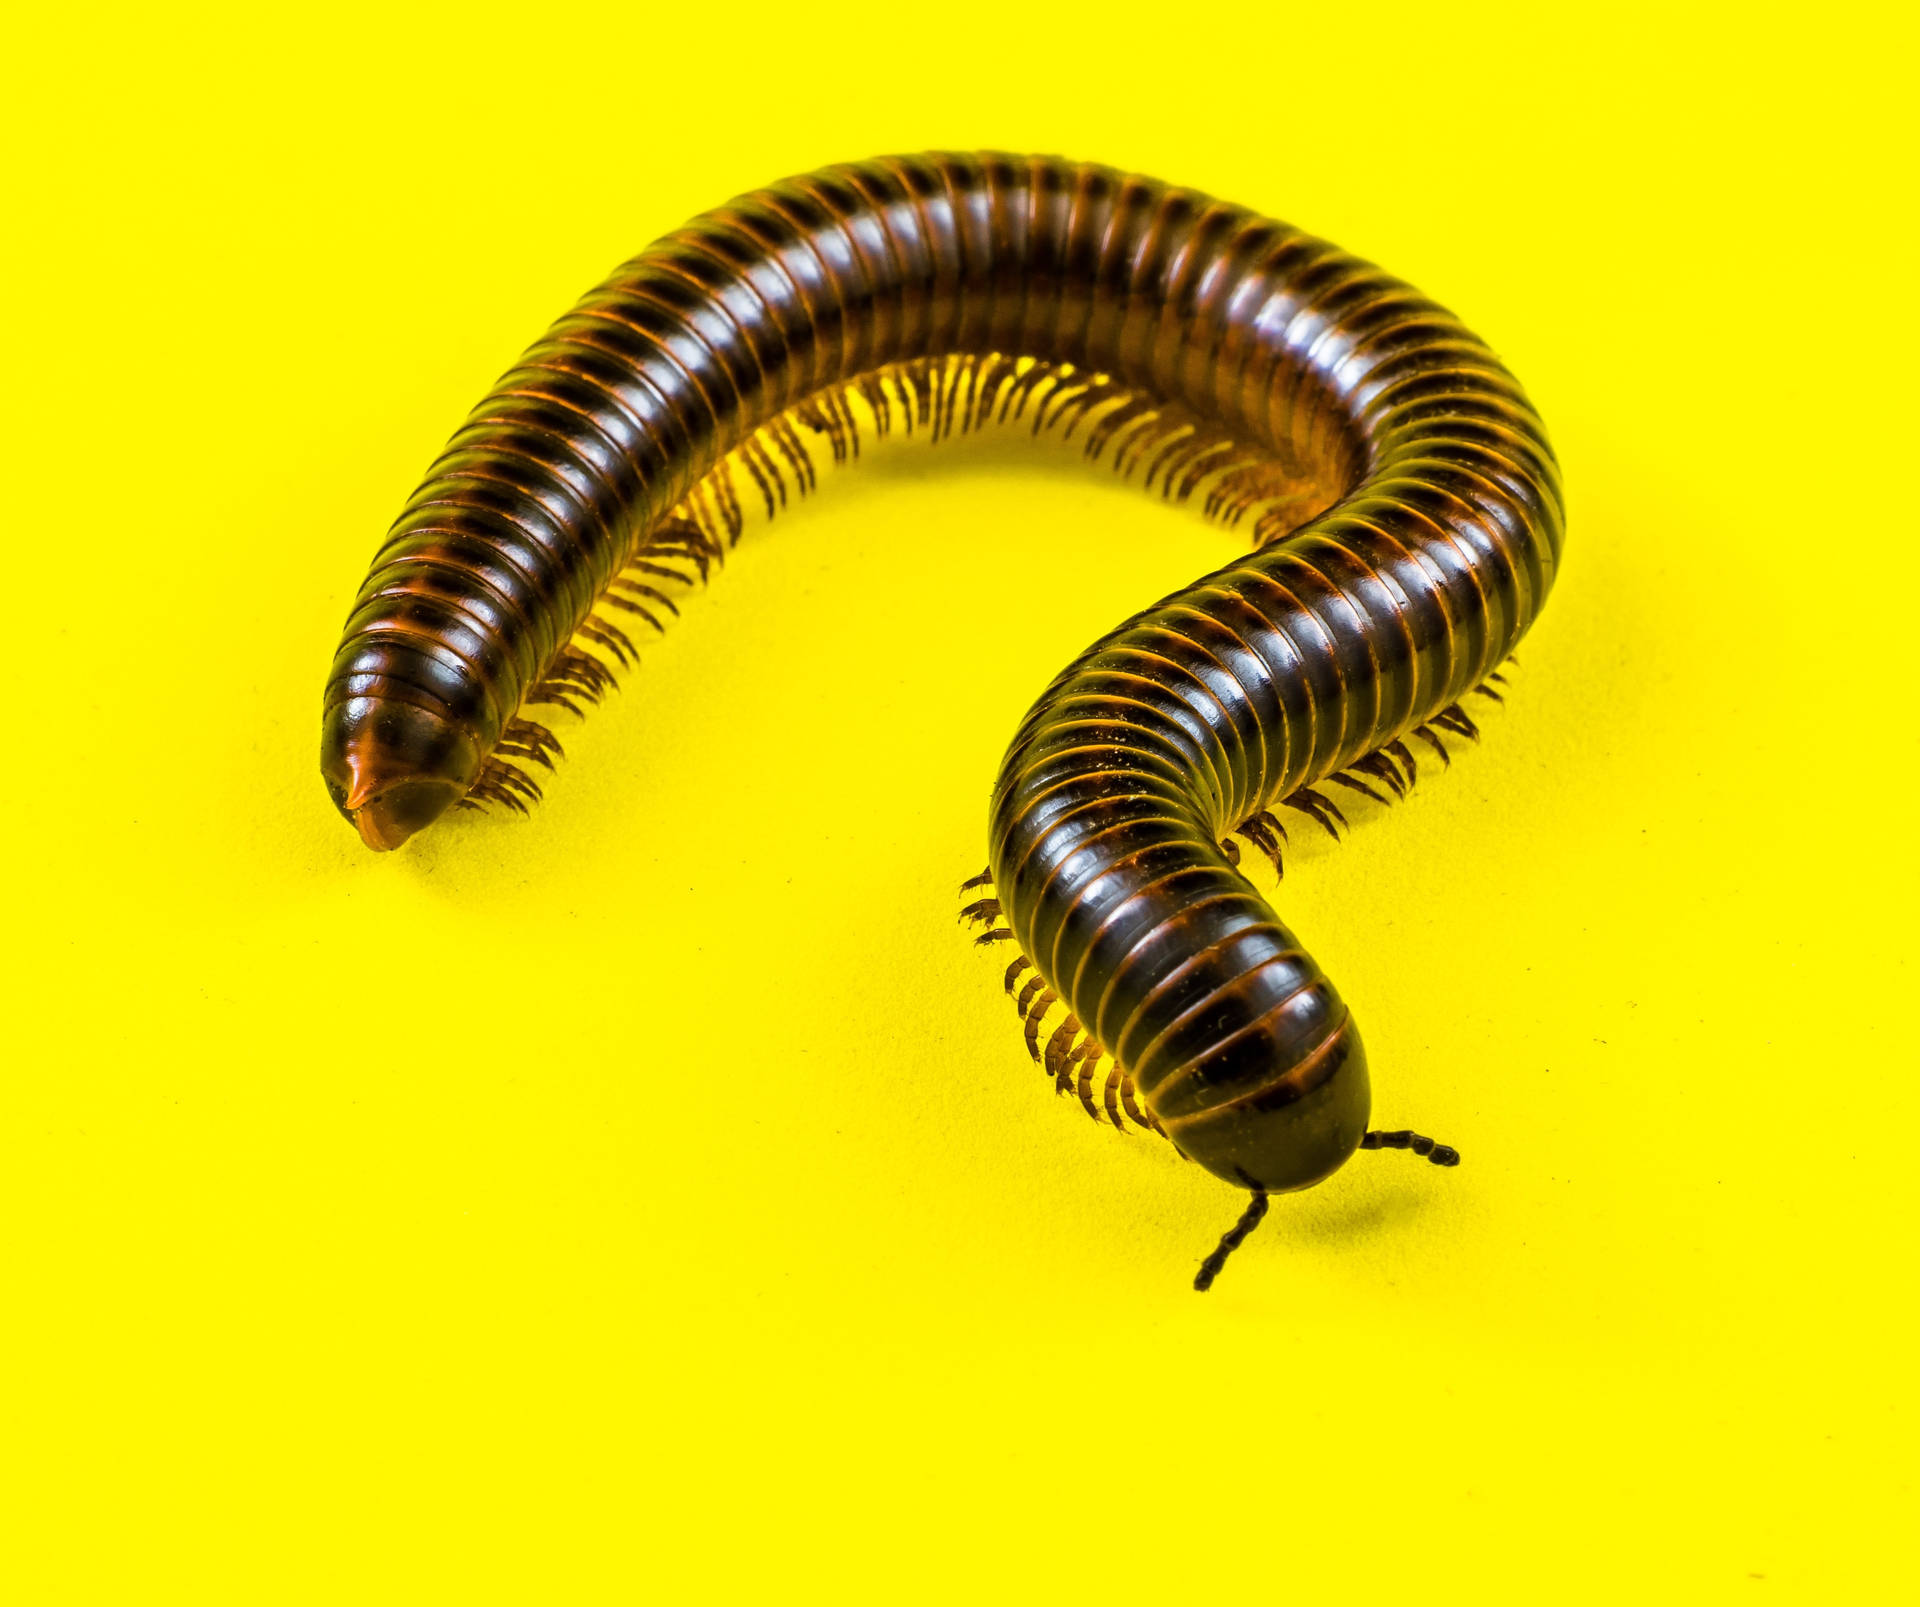 Millipede On A Yellow Surface Background